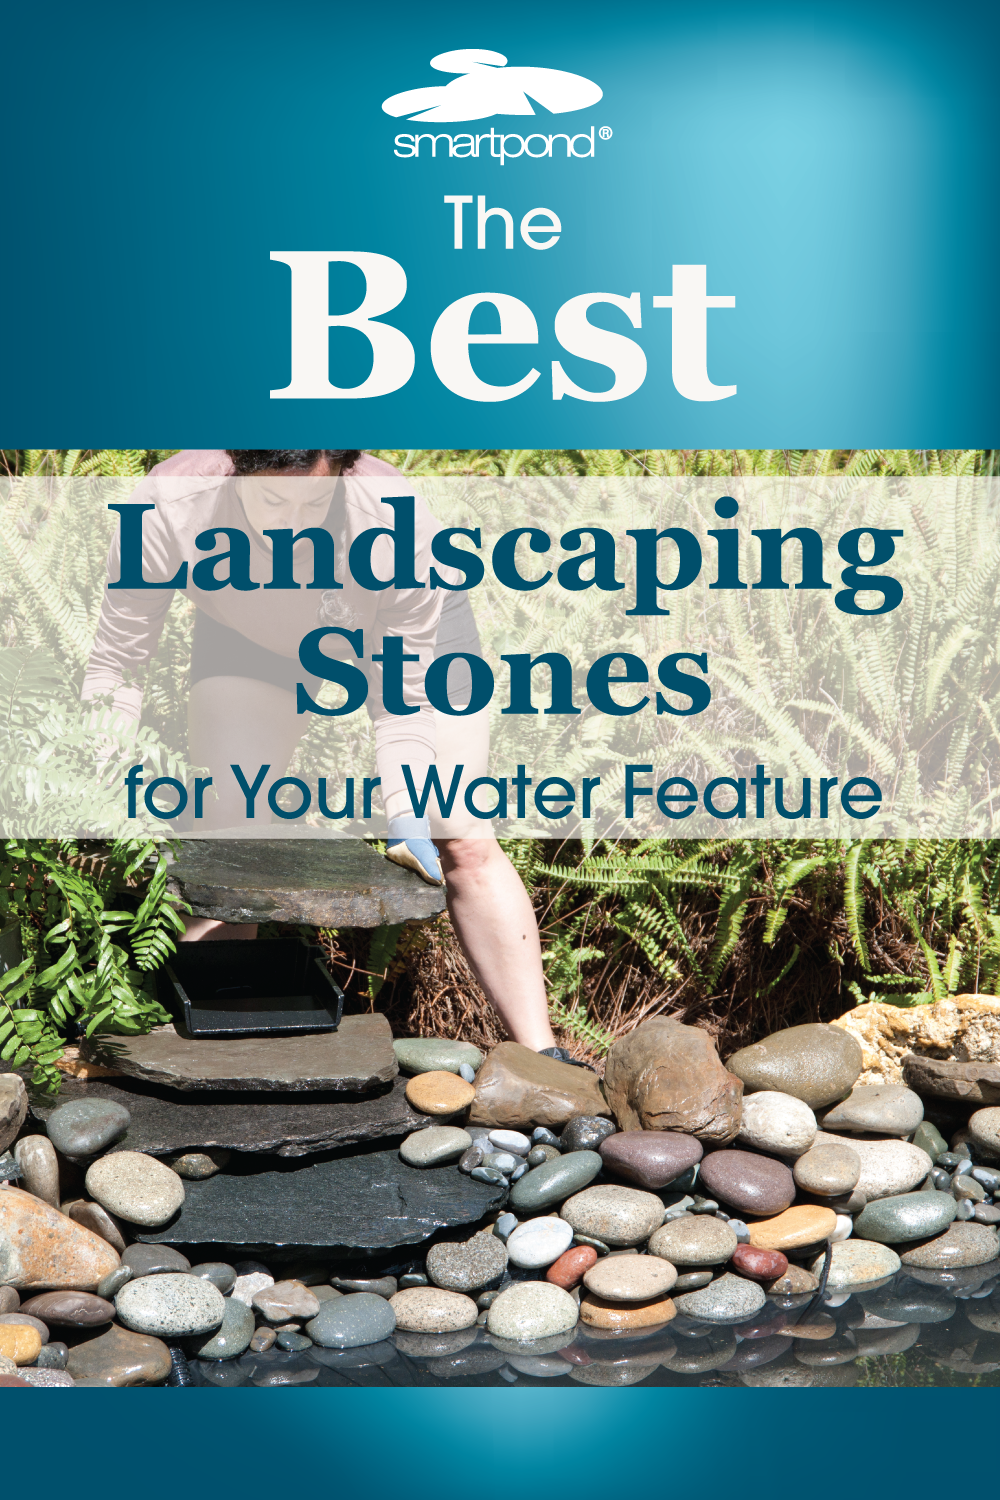 How To Stack Rocks - Best Prices on Everything for Ponds and Water Gardens  - Webb's Water Gardens